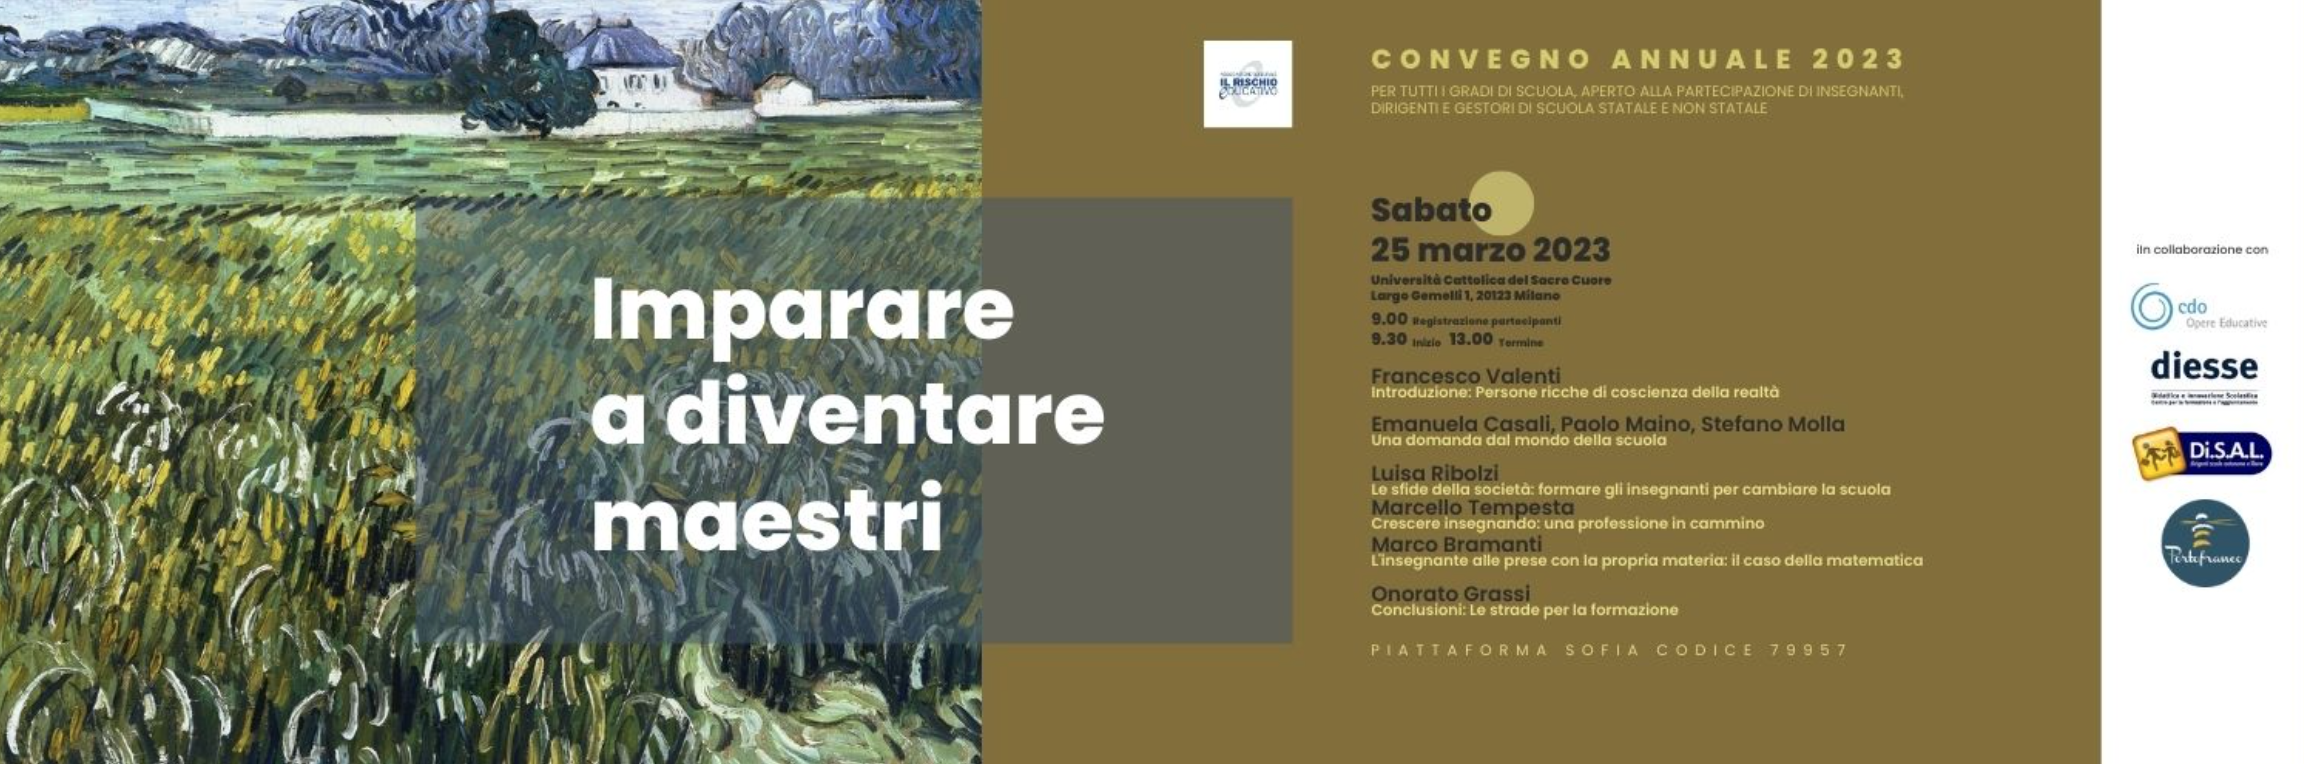 Featured image for “CONVEGNO ANNUALE 2023”